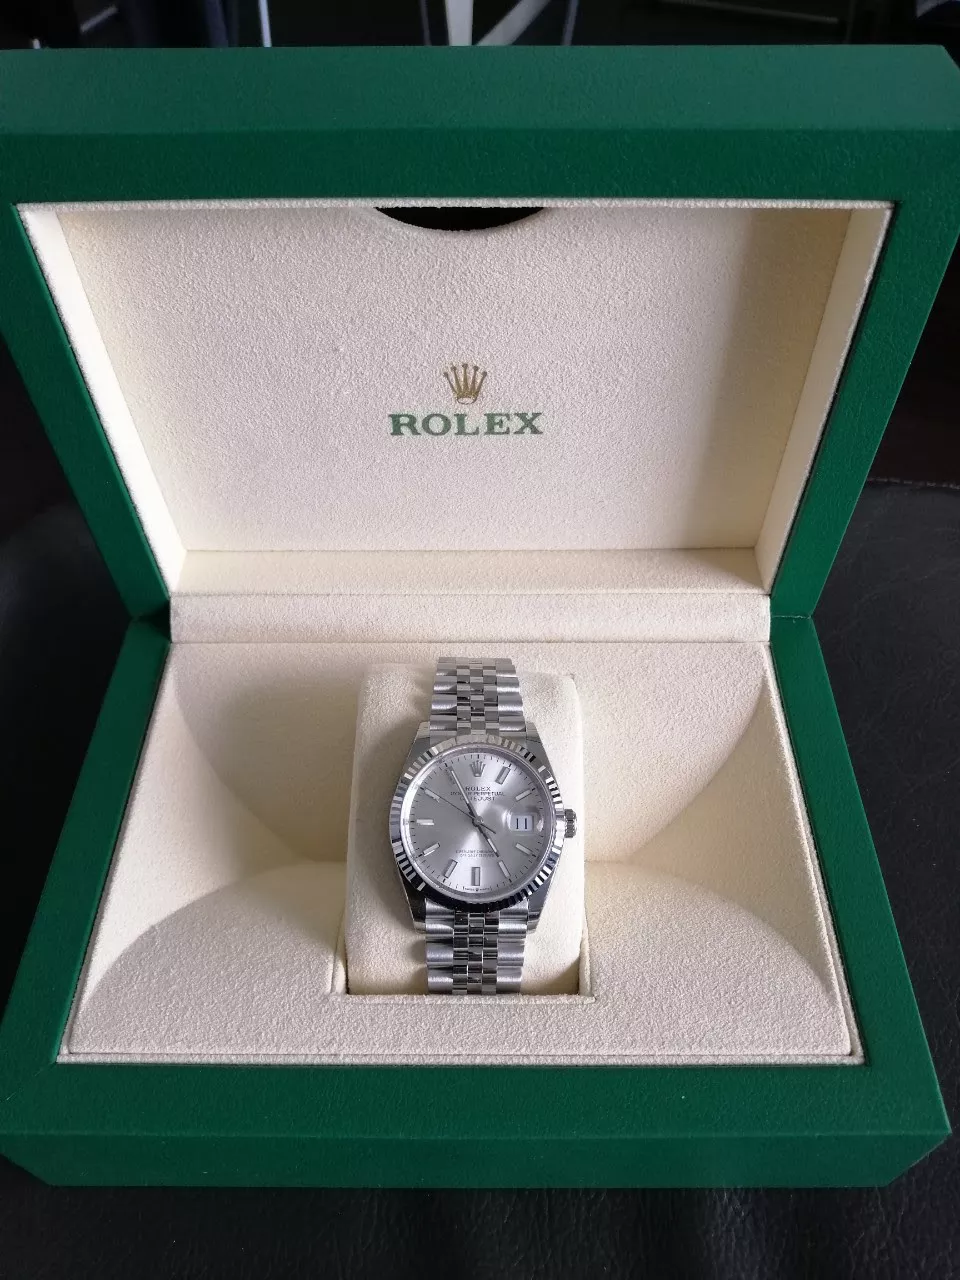 ROLEX OYSTER PERPETUAL 126234 DATEJUST 36